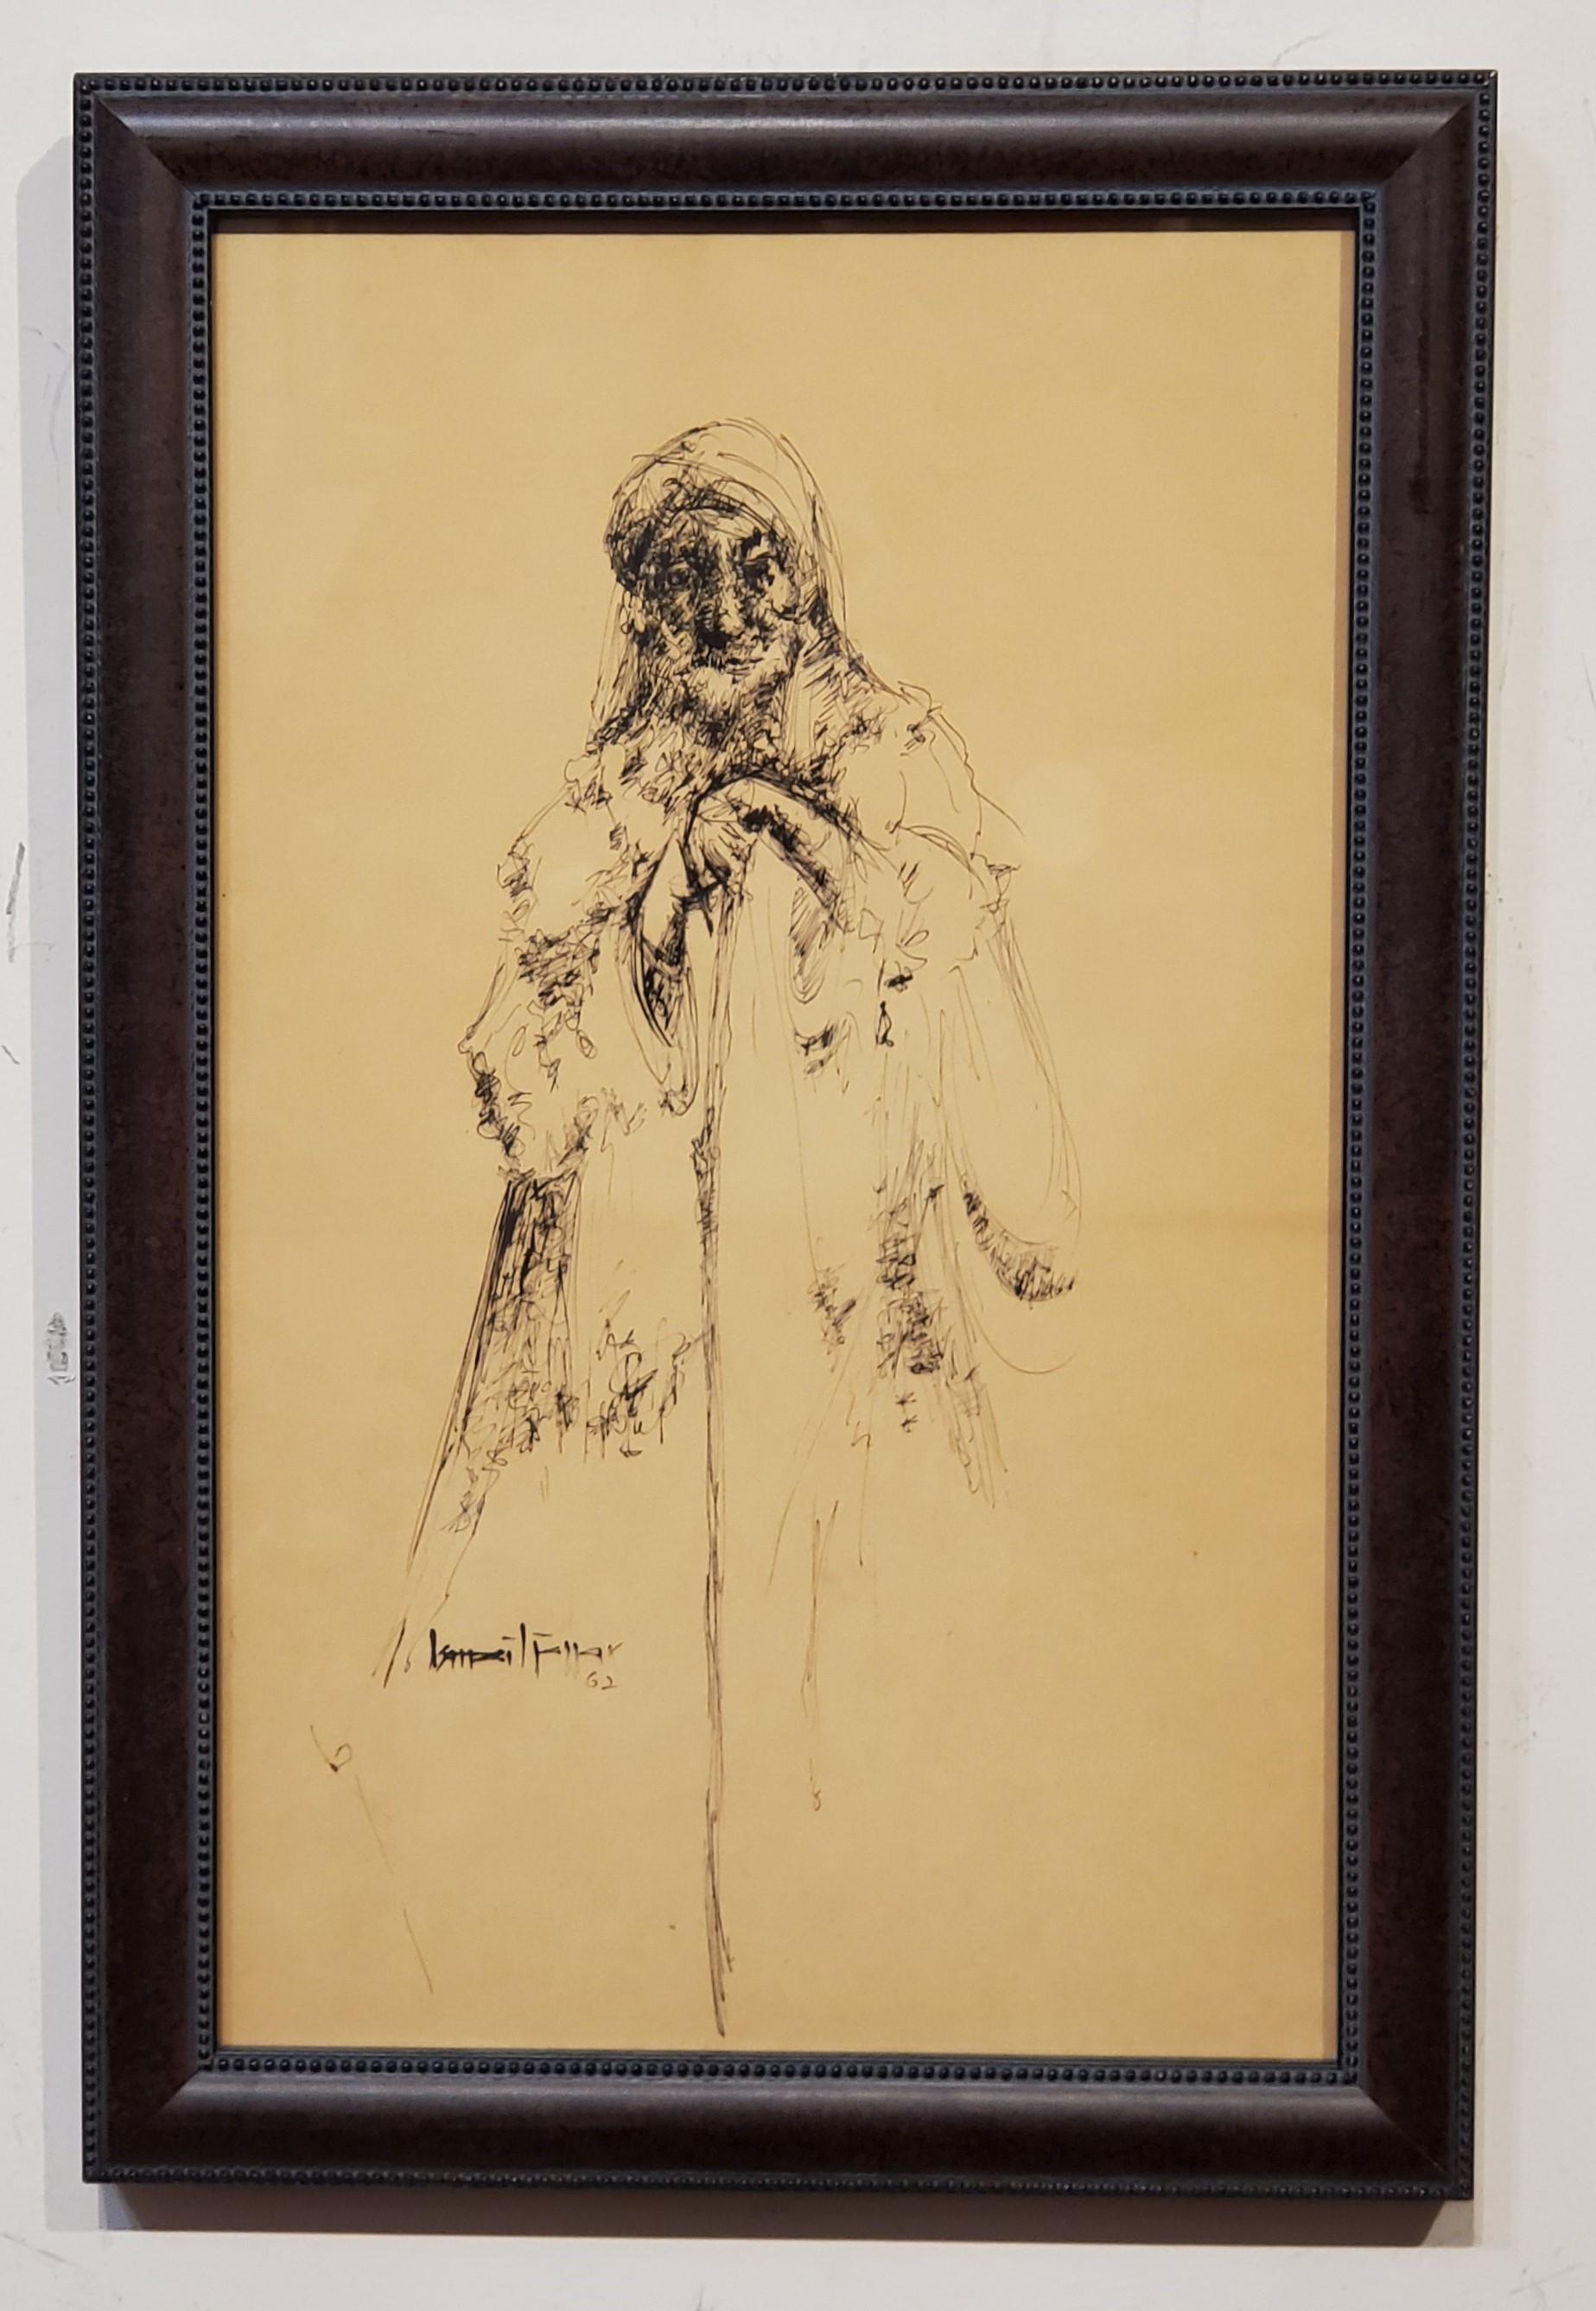 Ink Drawing of a Peasant Holding a Cane, dated '62 - Art by Unknown